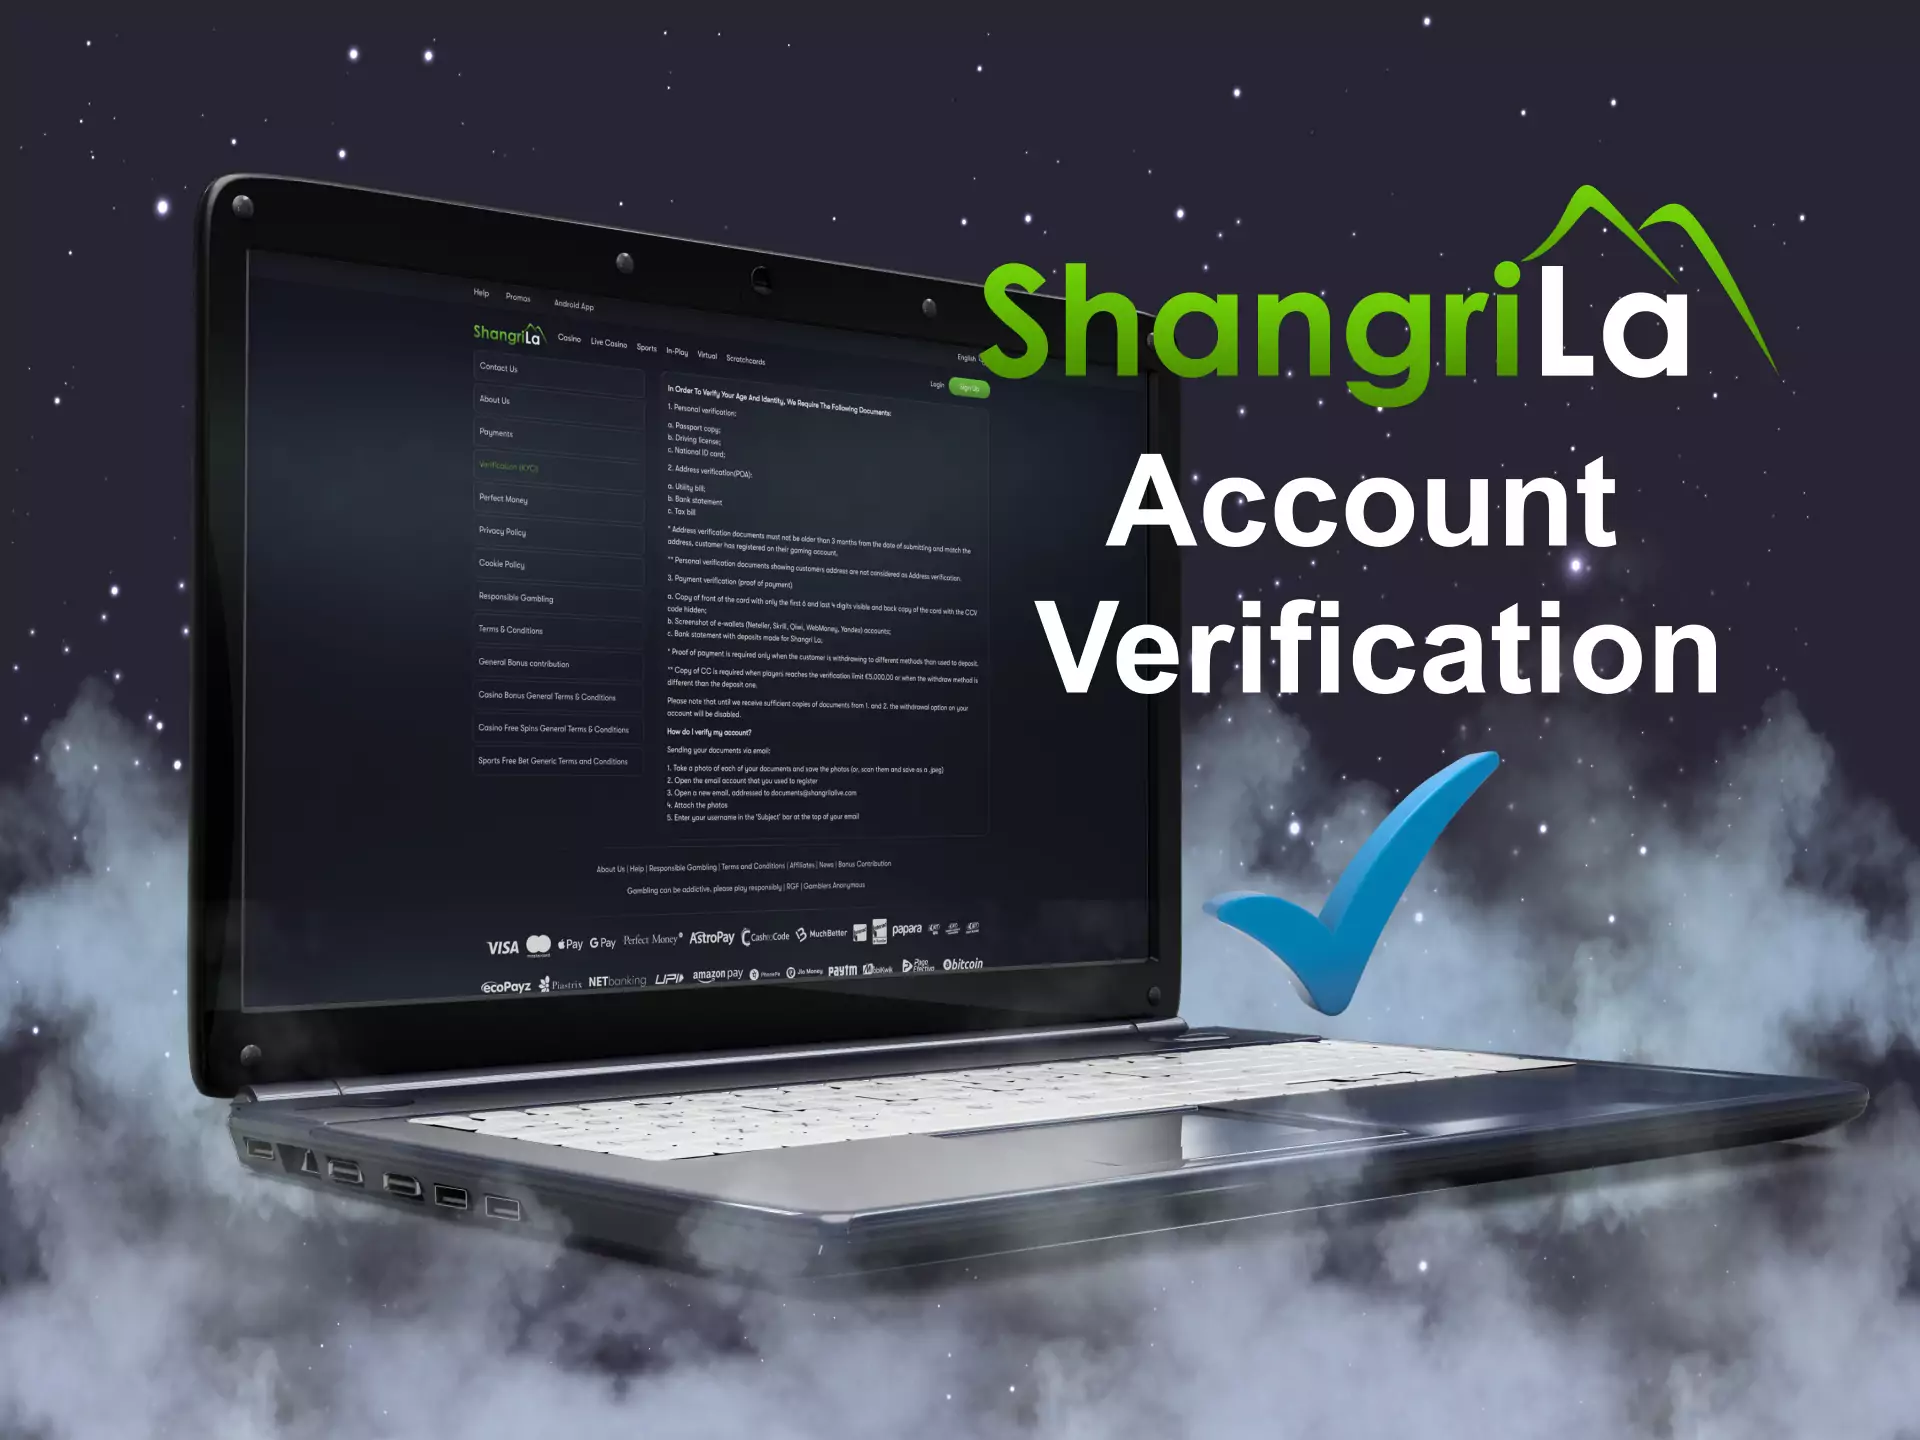 After you create an account on the Shangri La website, verify it.